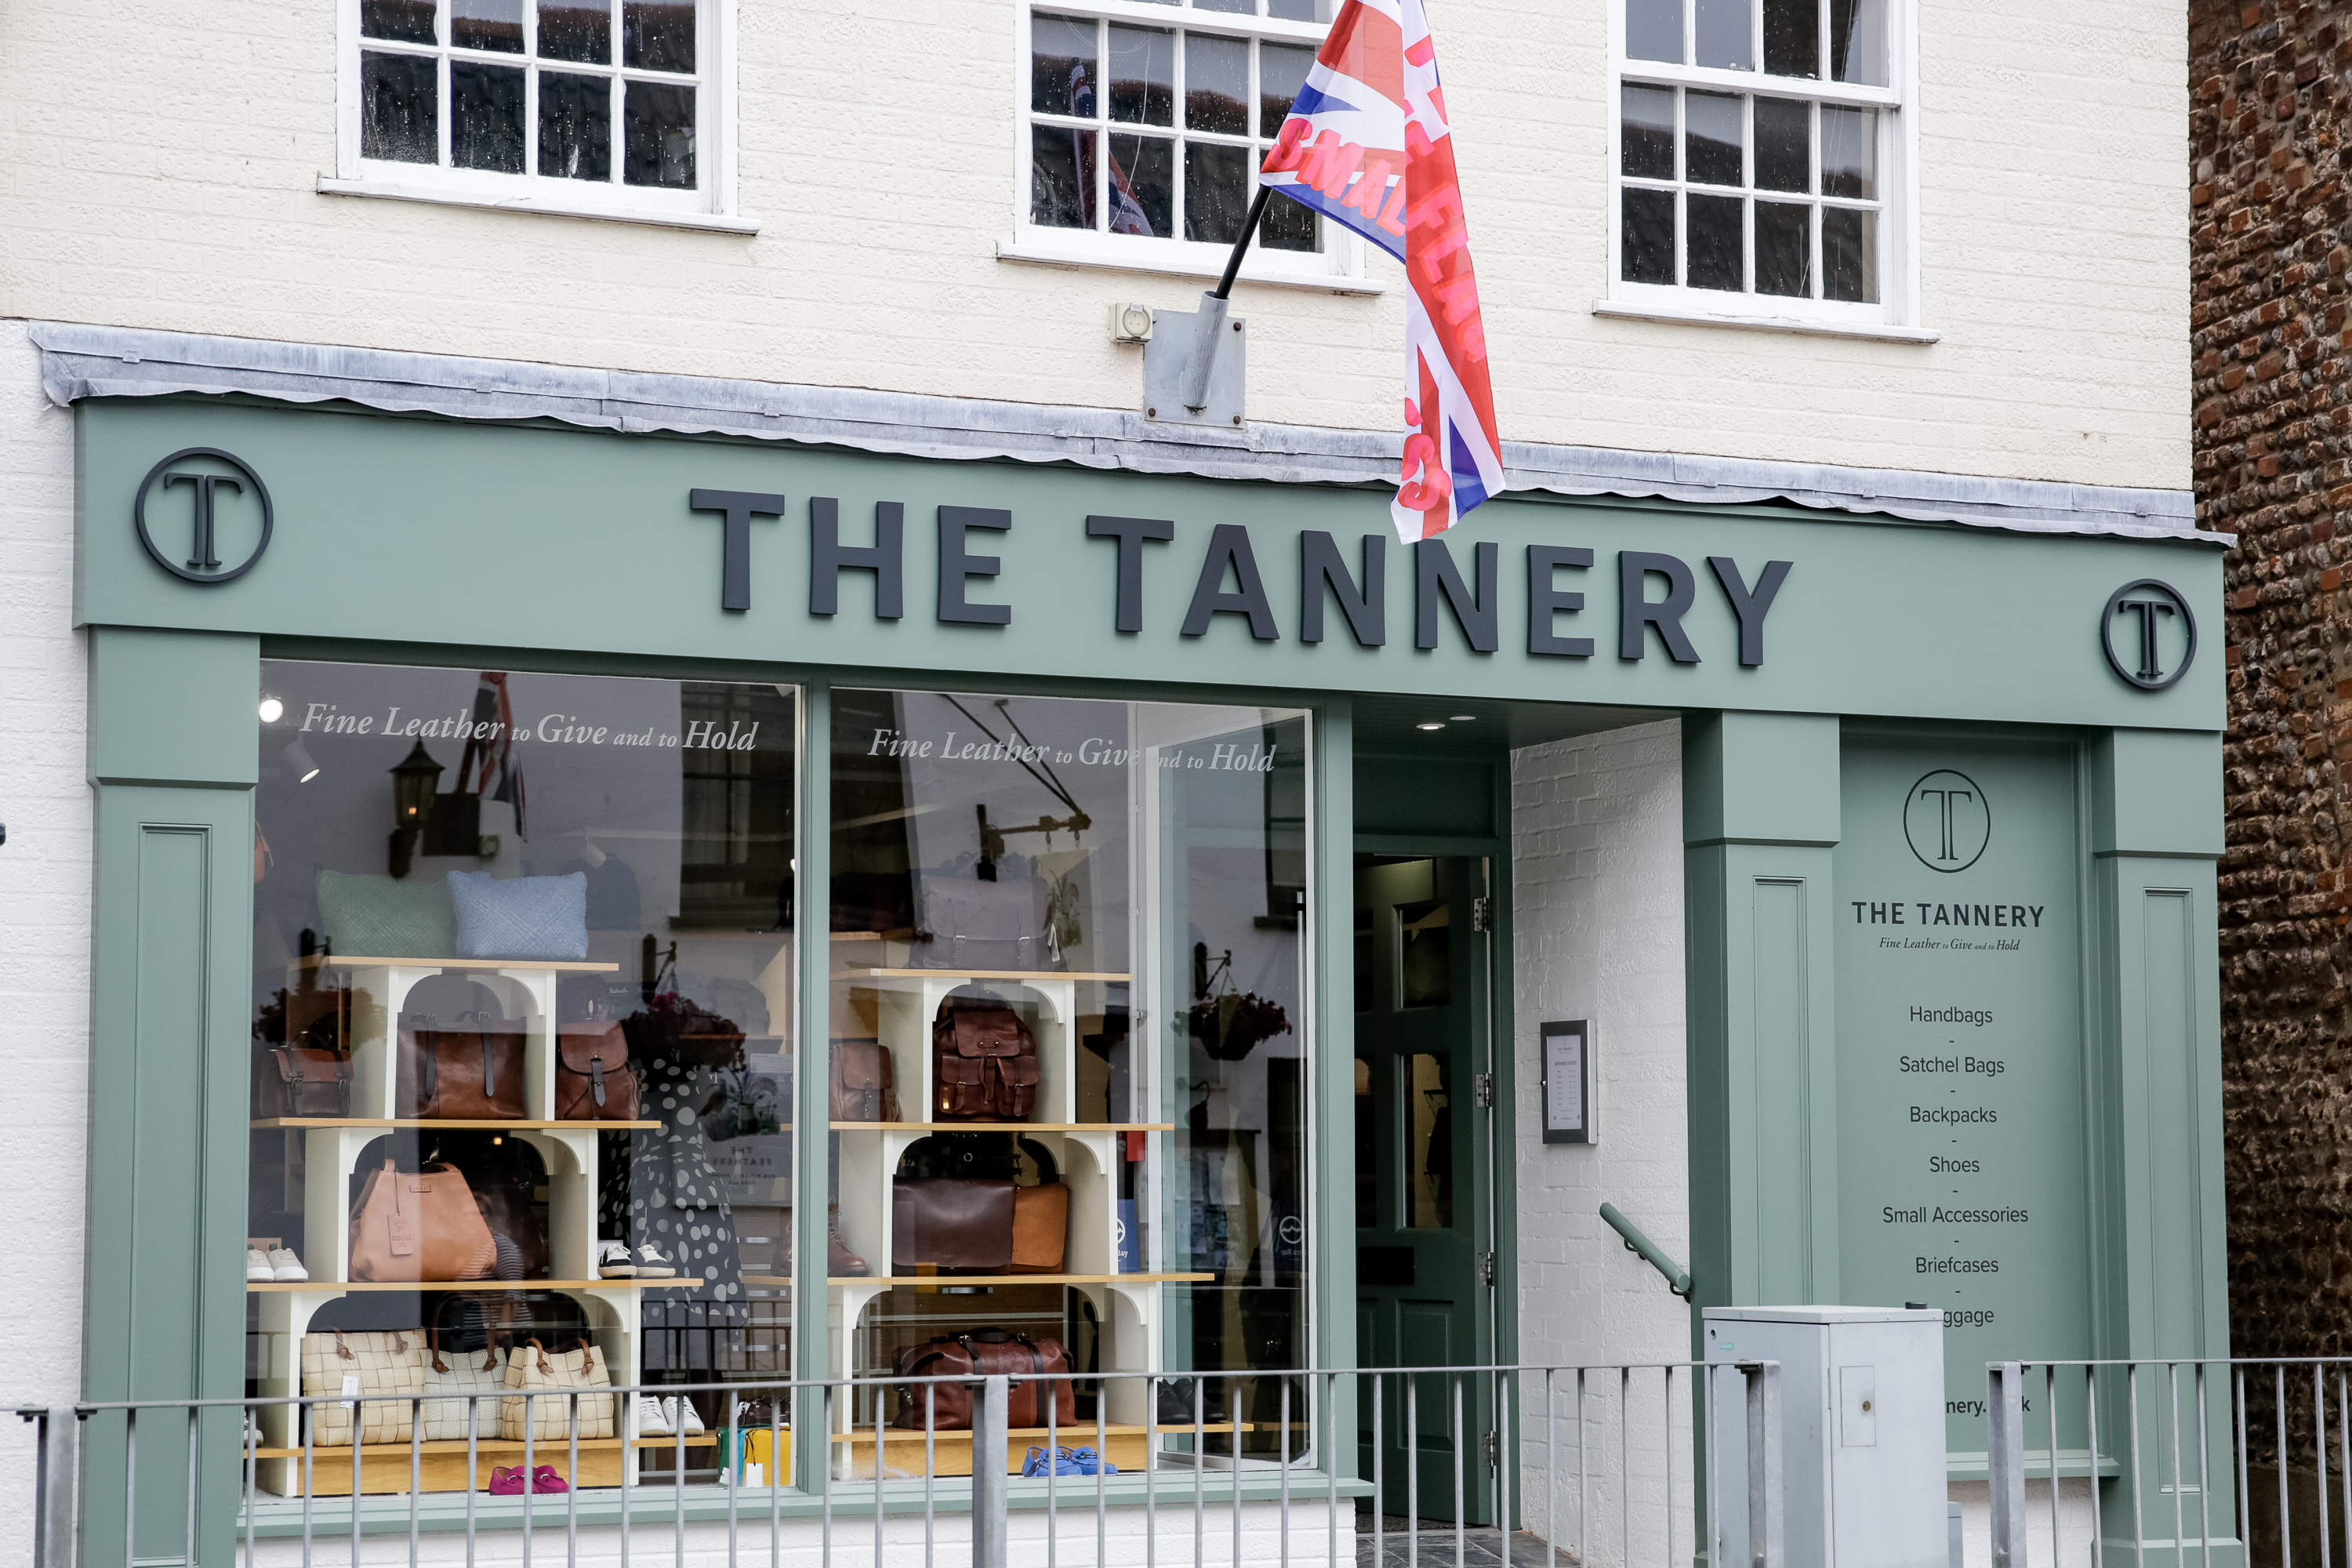 Tannery|7|Market|Place|Holt|Main Street|